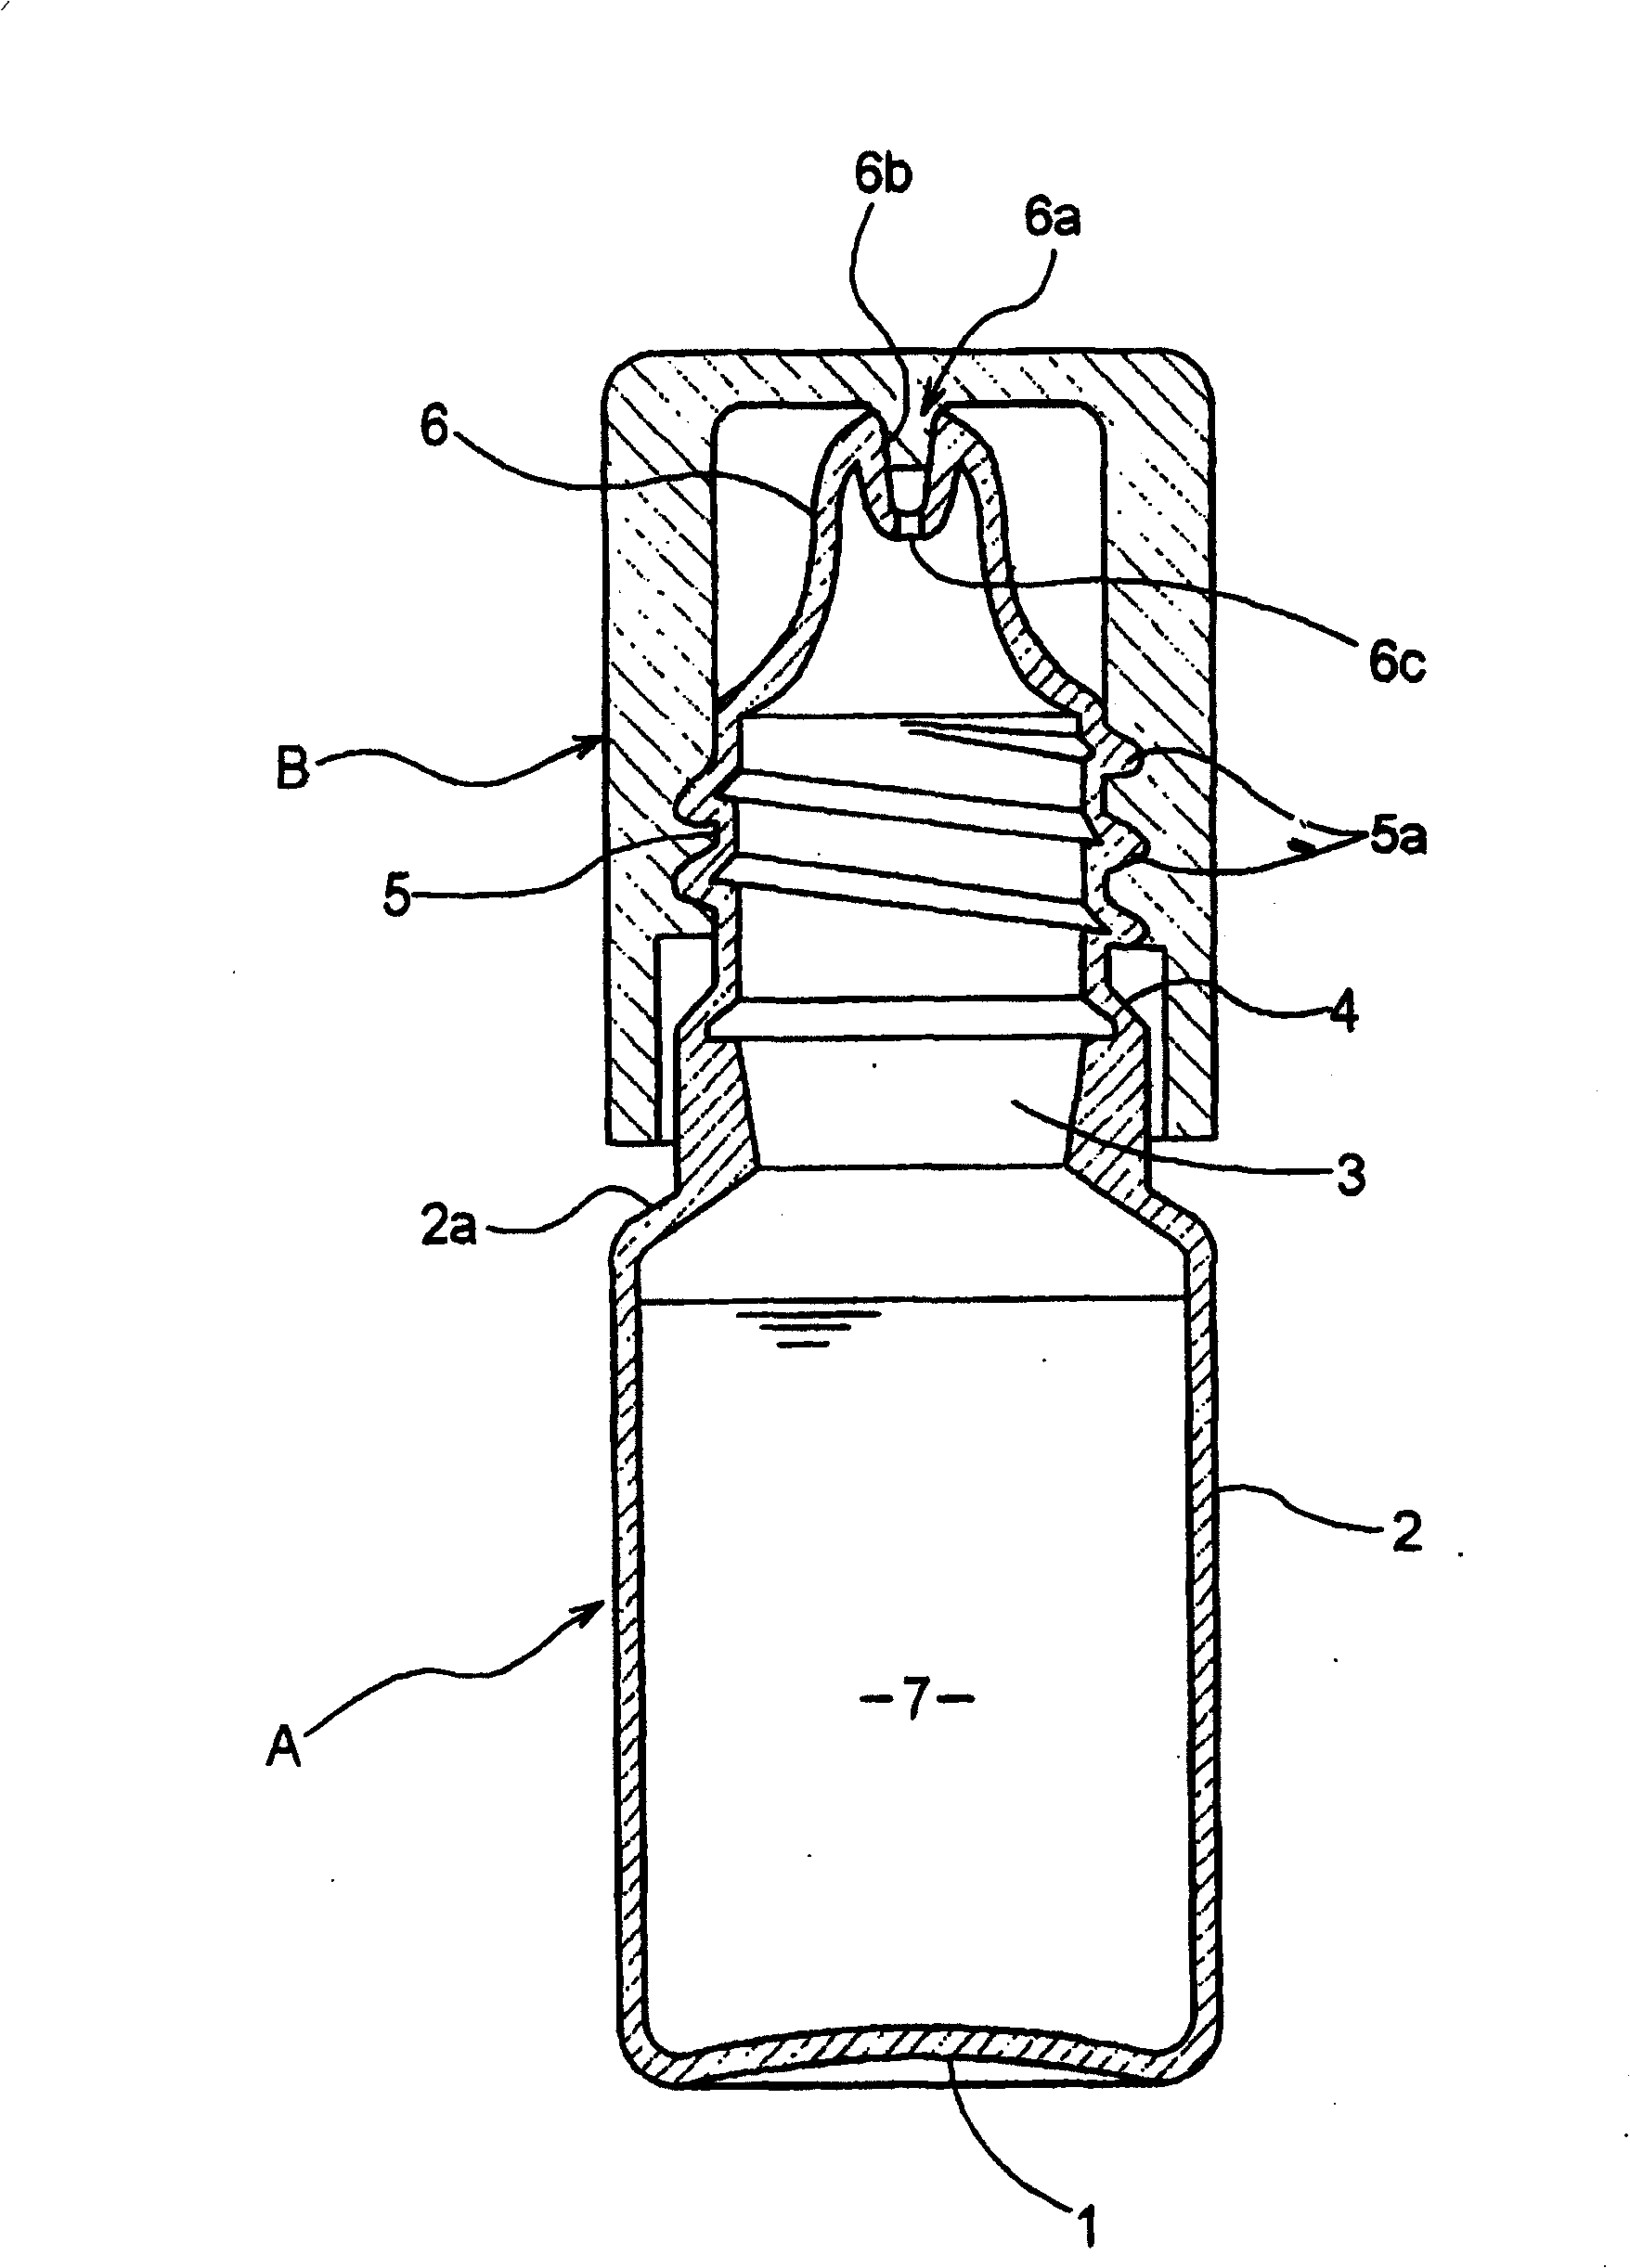 Container manufacturing device